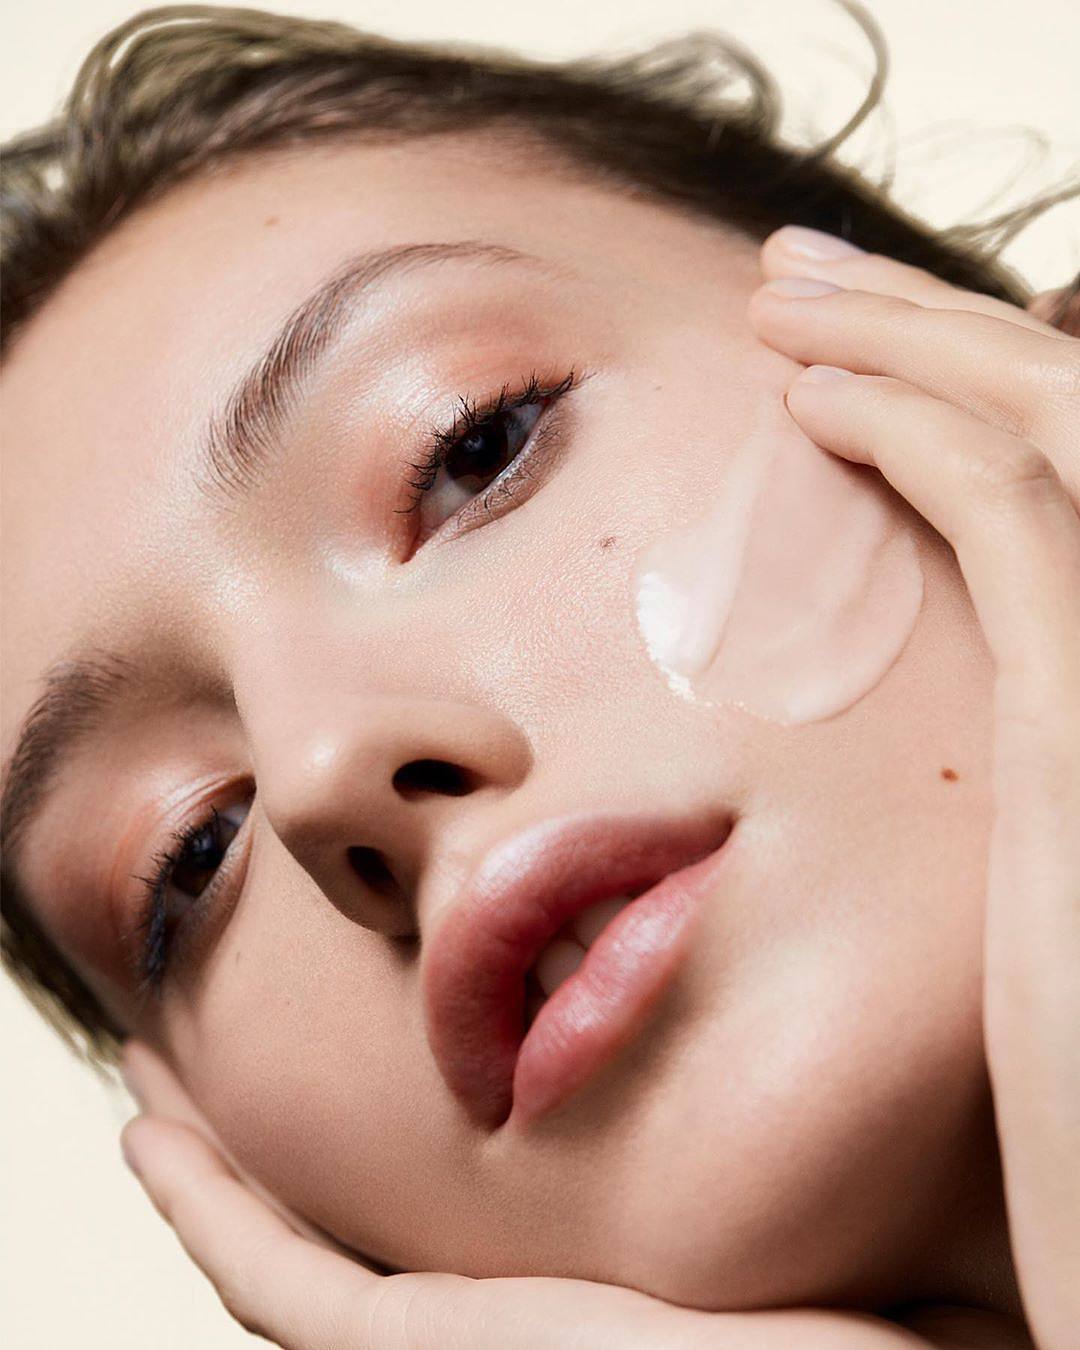 How to choose the right skin care products for sensitive skin?